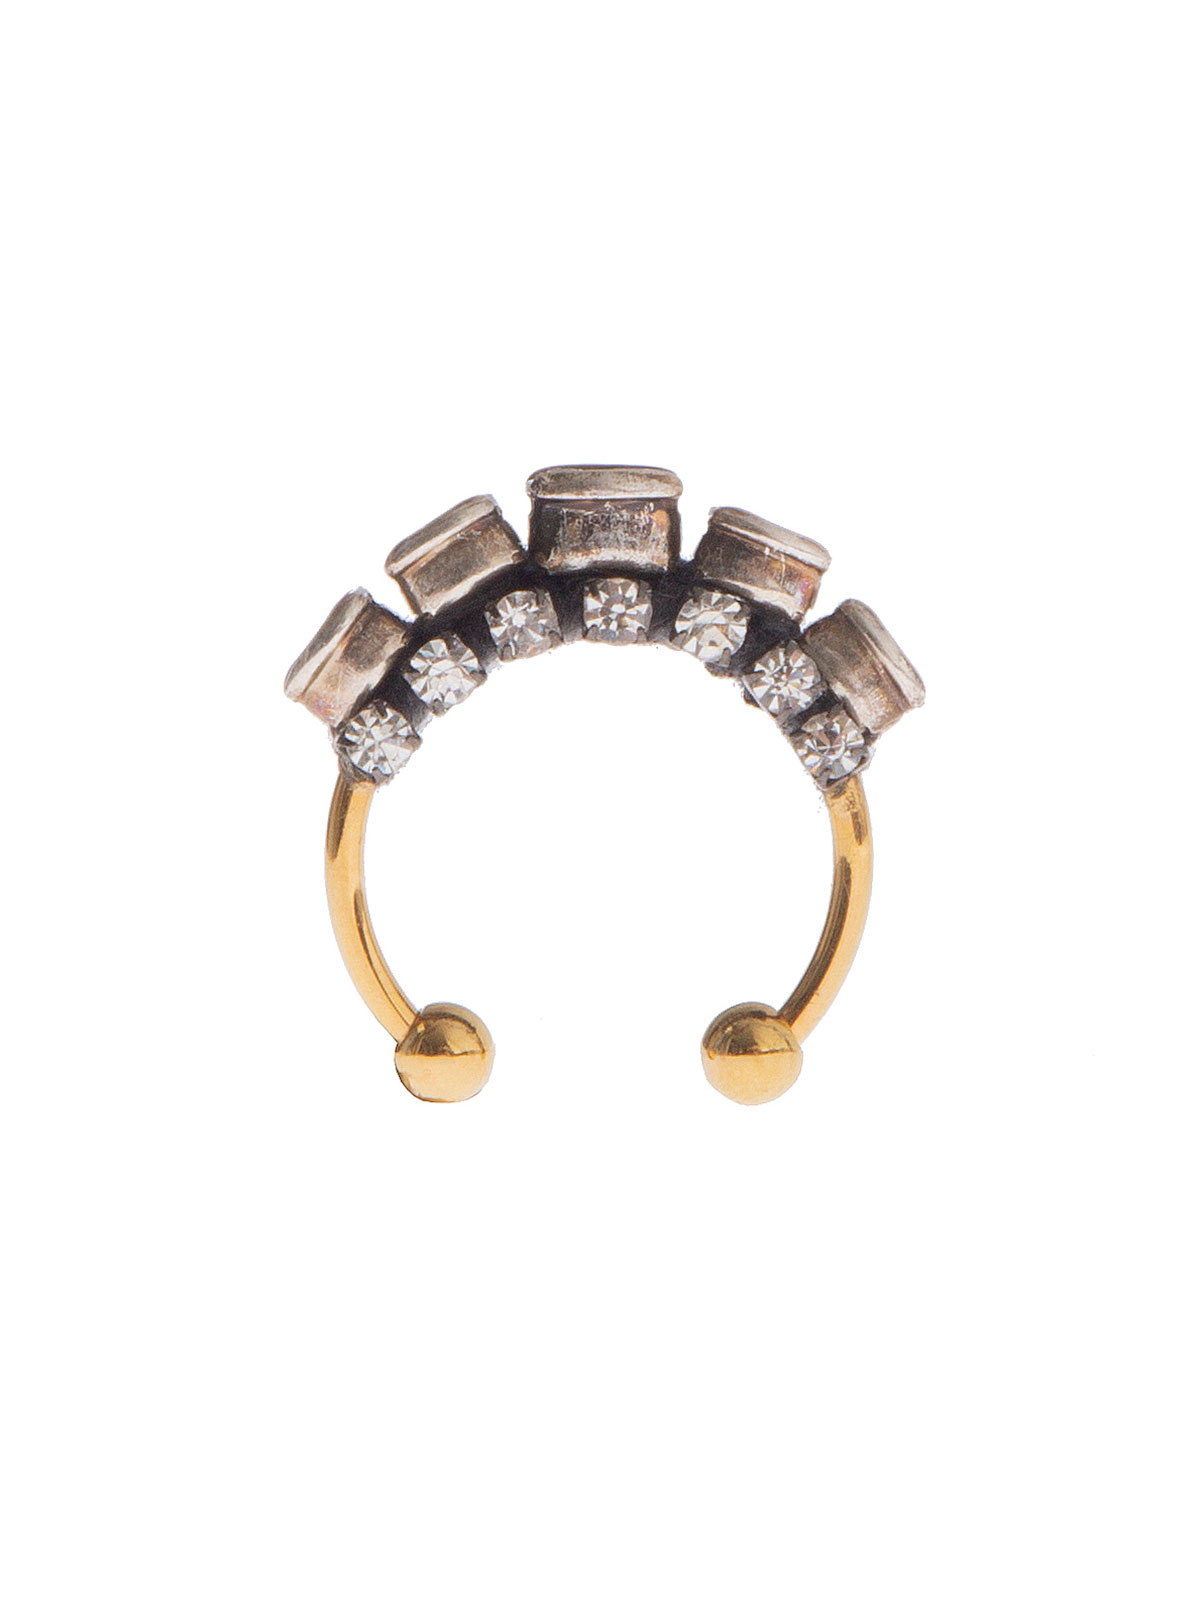 Brass ring embellished with crystal oval stones